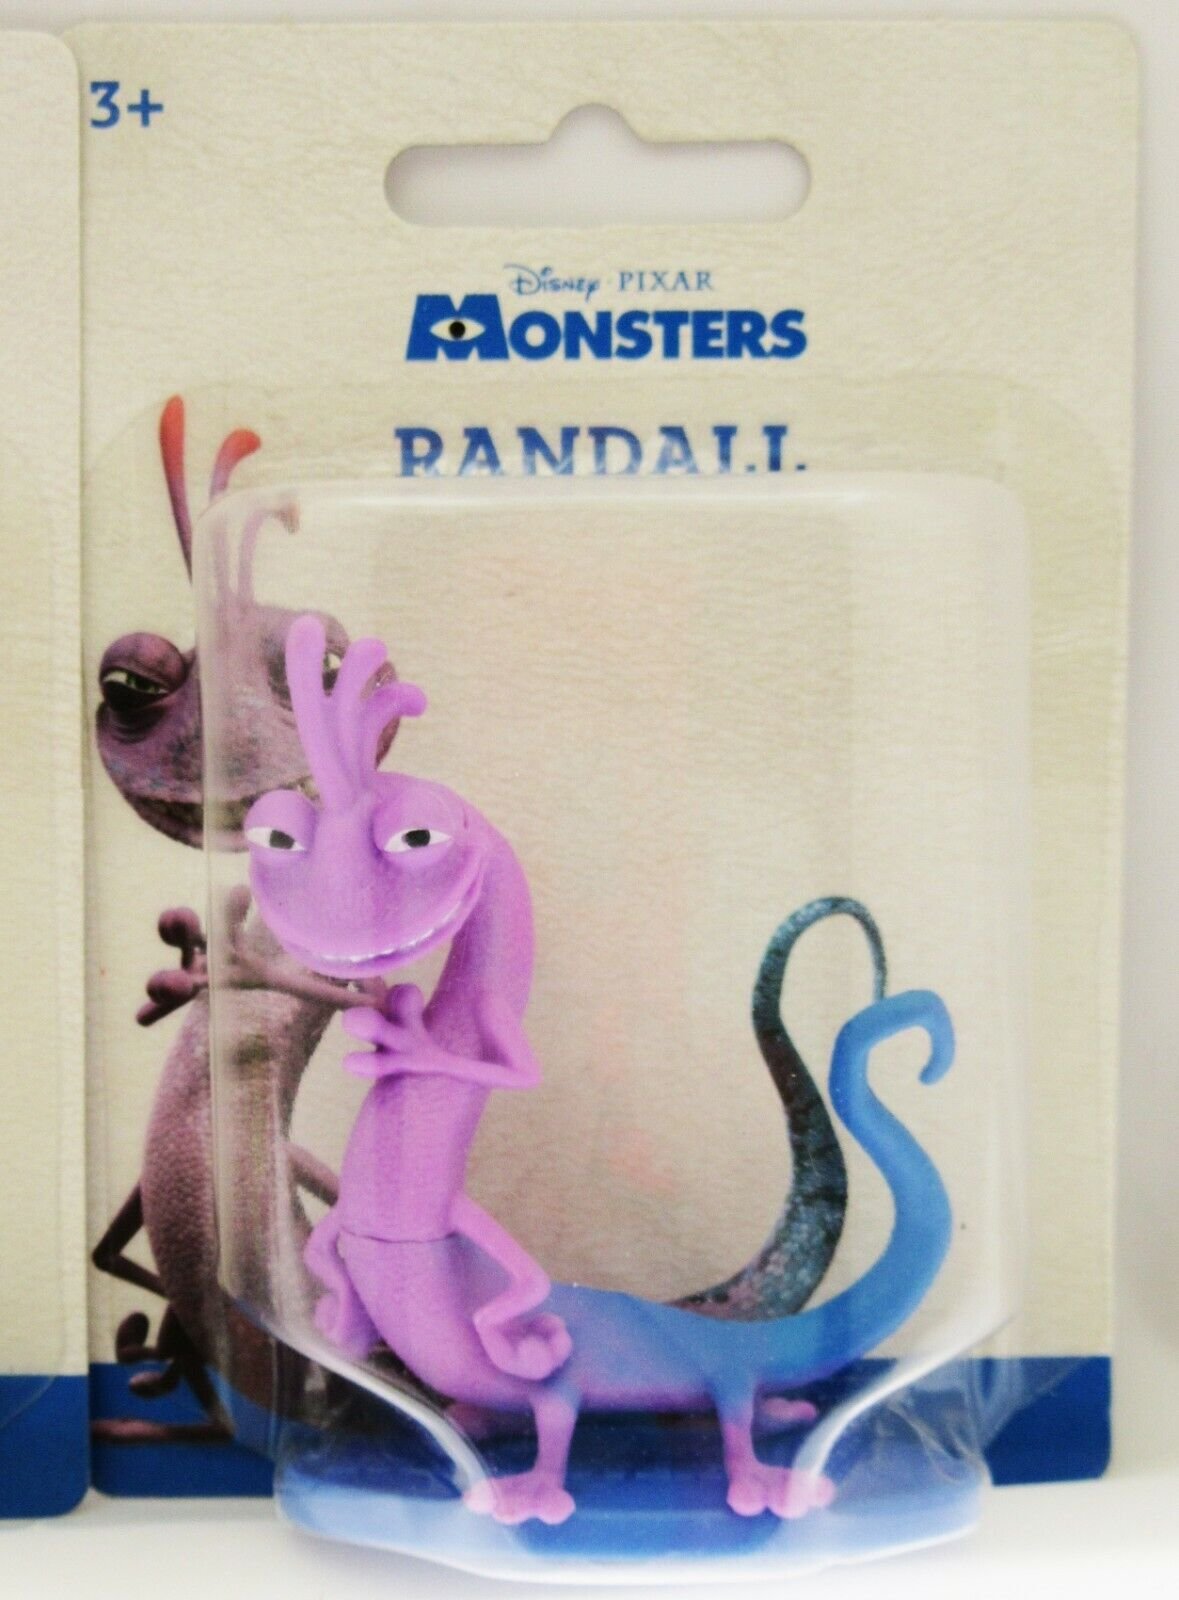 Monsters Mattel Model Toy Figurine Collectibles Mike Randall Sully Boo Roz